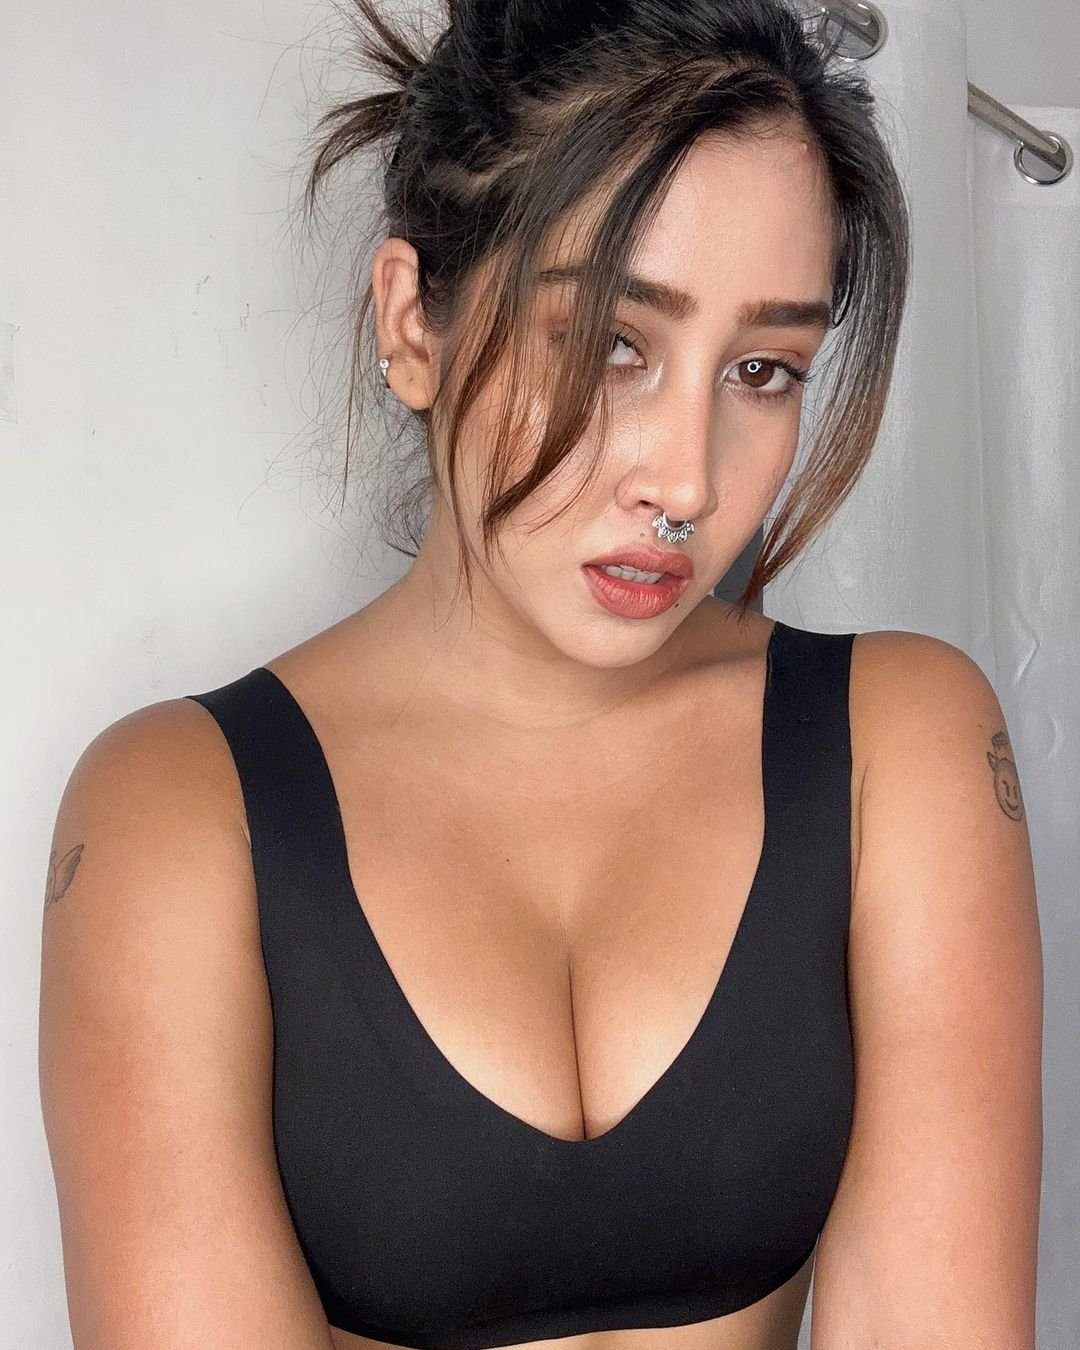 Indian Instagram girl Sofia Ansaris topless pic and cleavage... photo